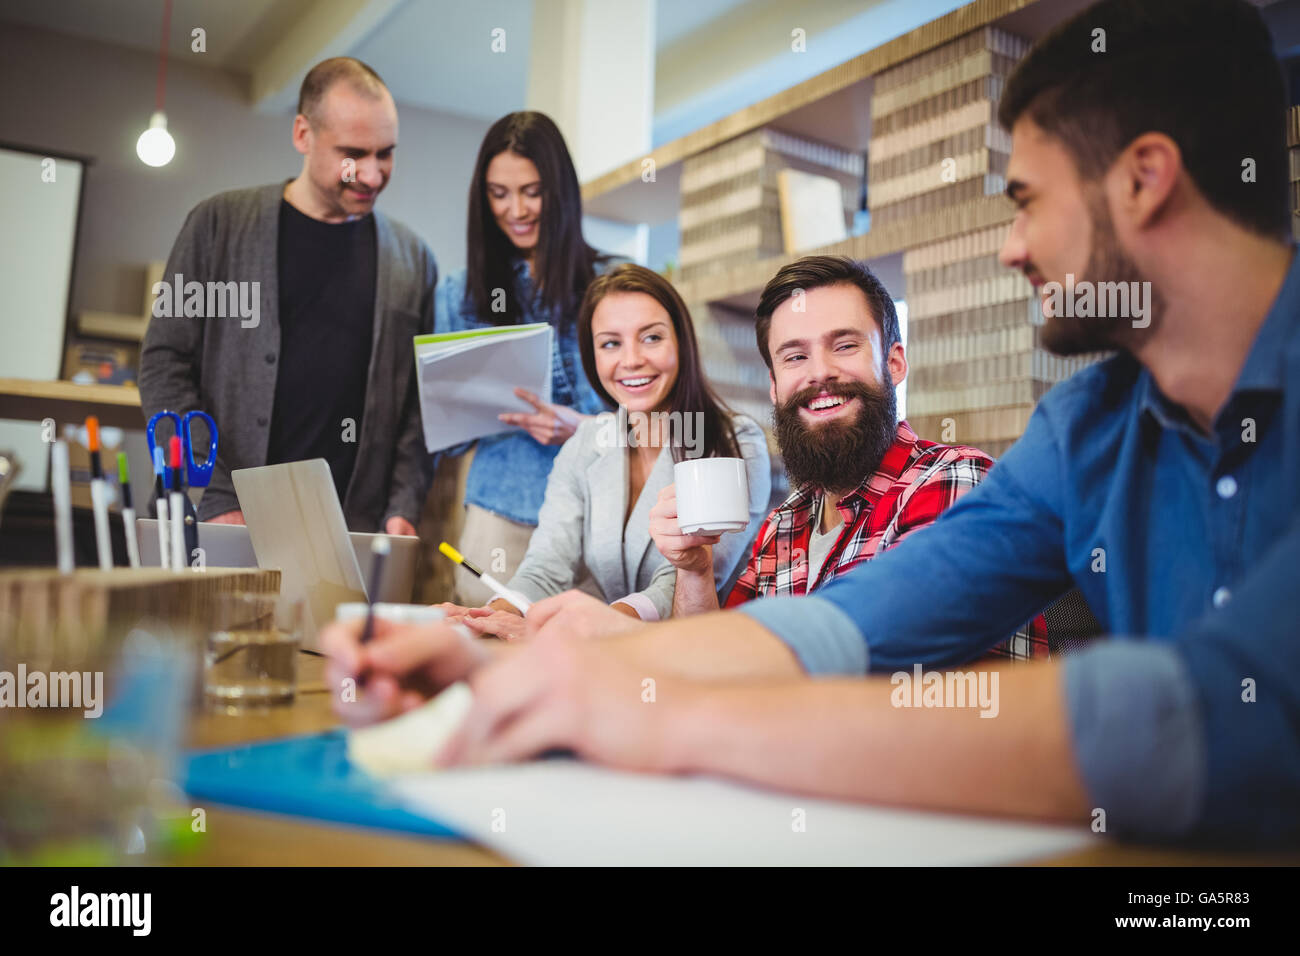 Business people smiling during meeting Stock Photo